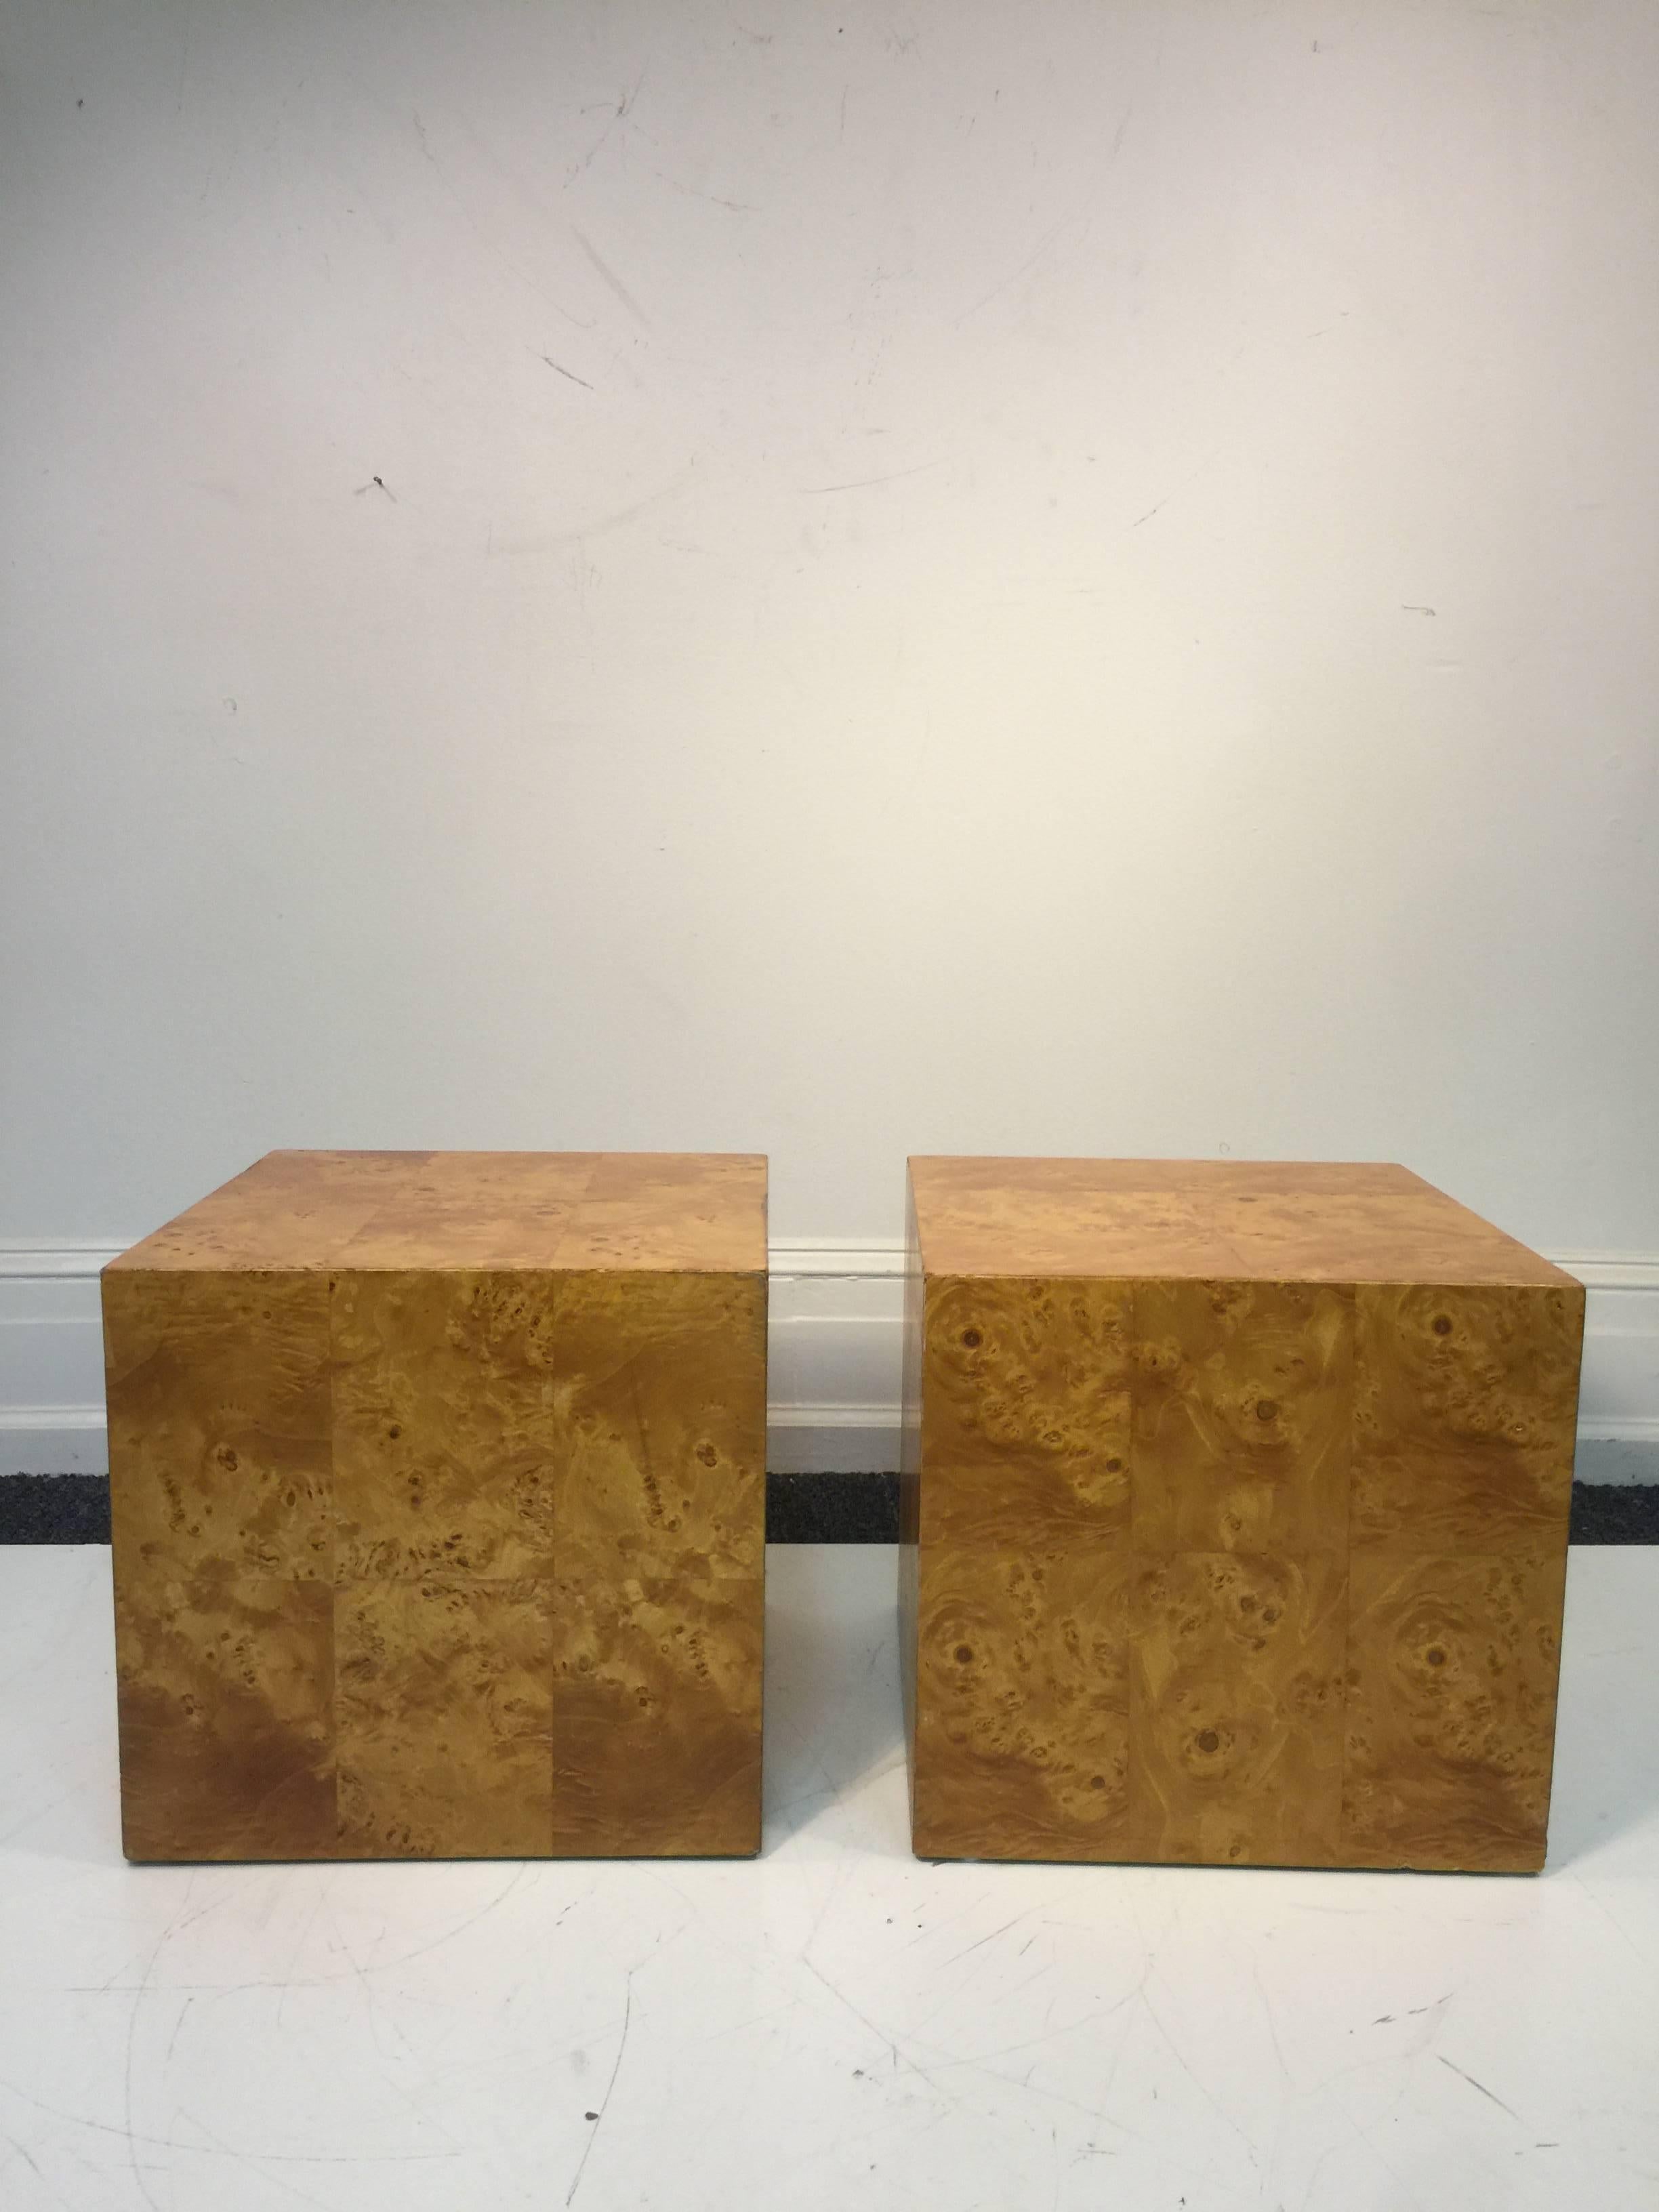 A pair of marvelous Milo Baughman burl wood, cube-shaped side or end tables, circa 1970. Good condition with age appropriate wear.